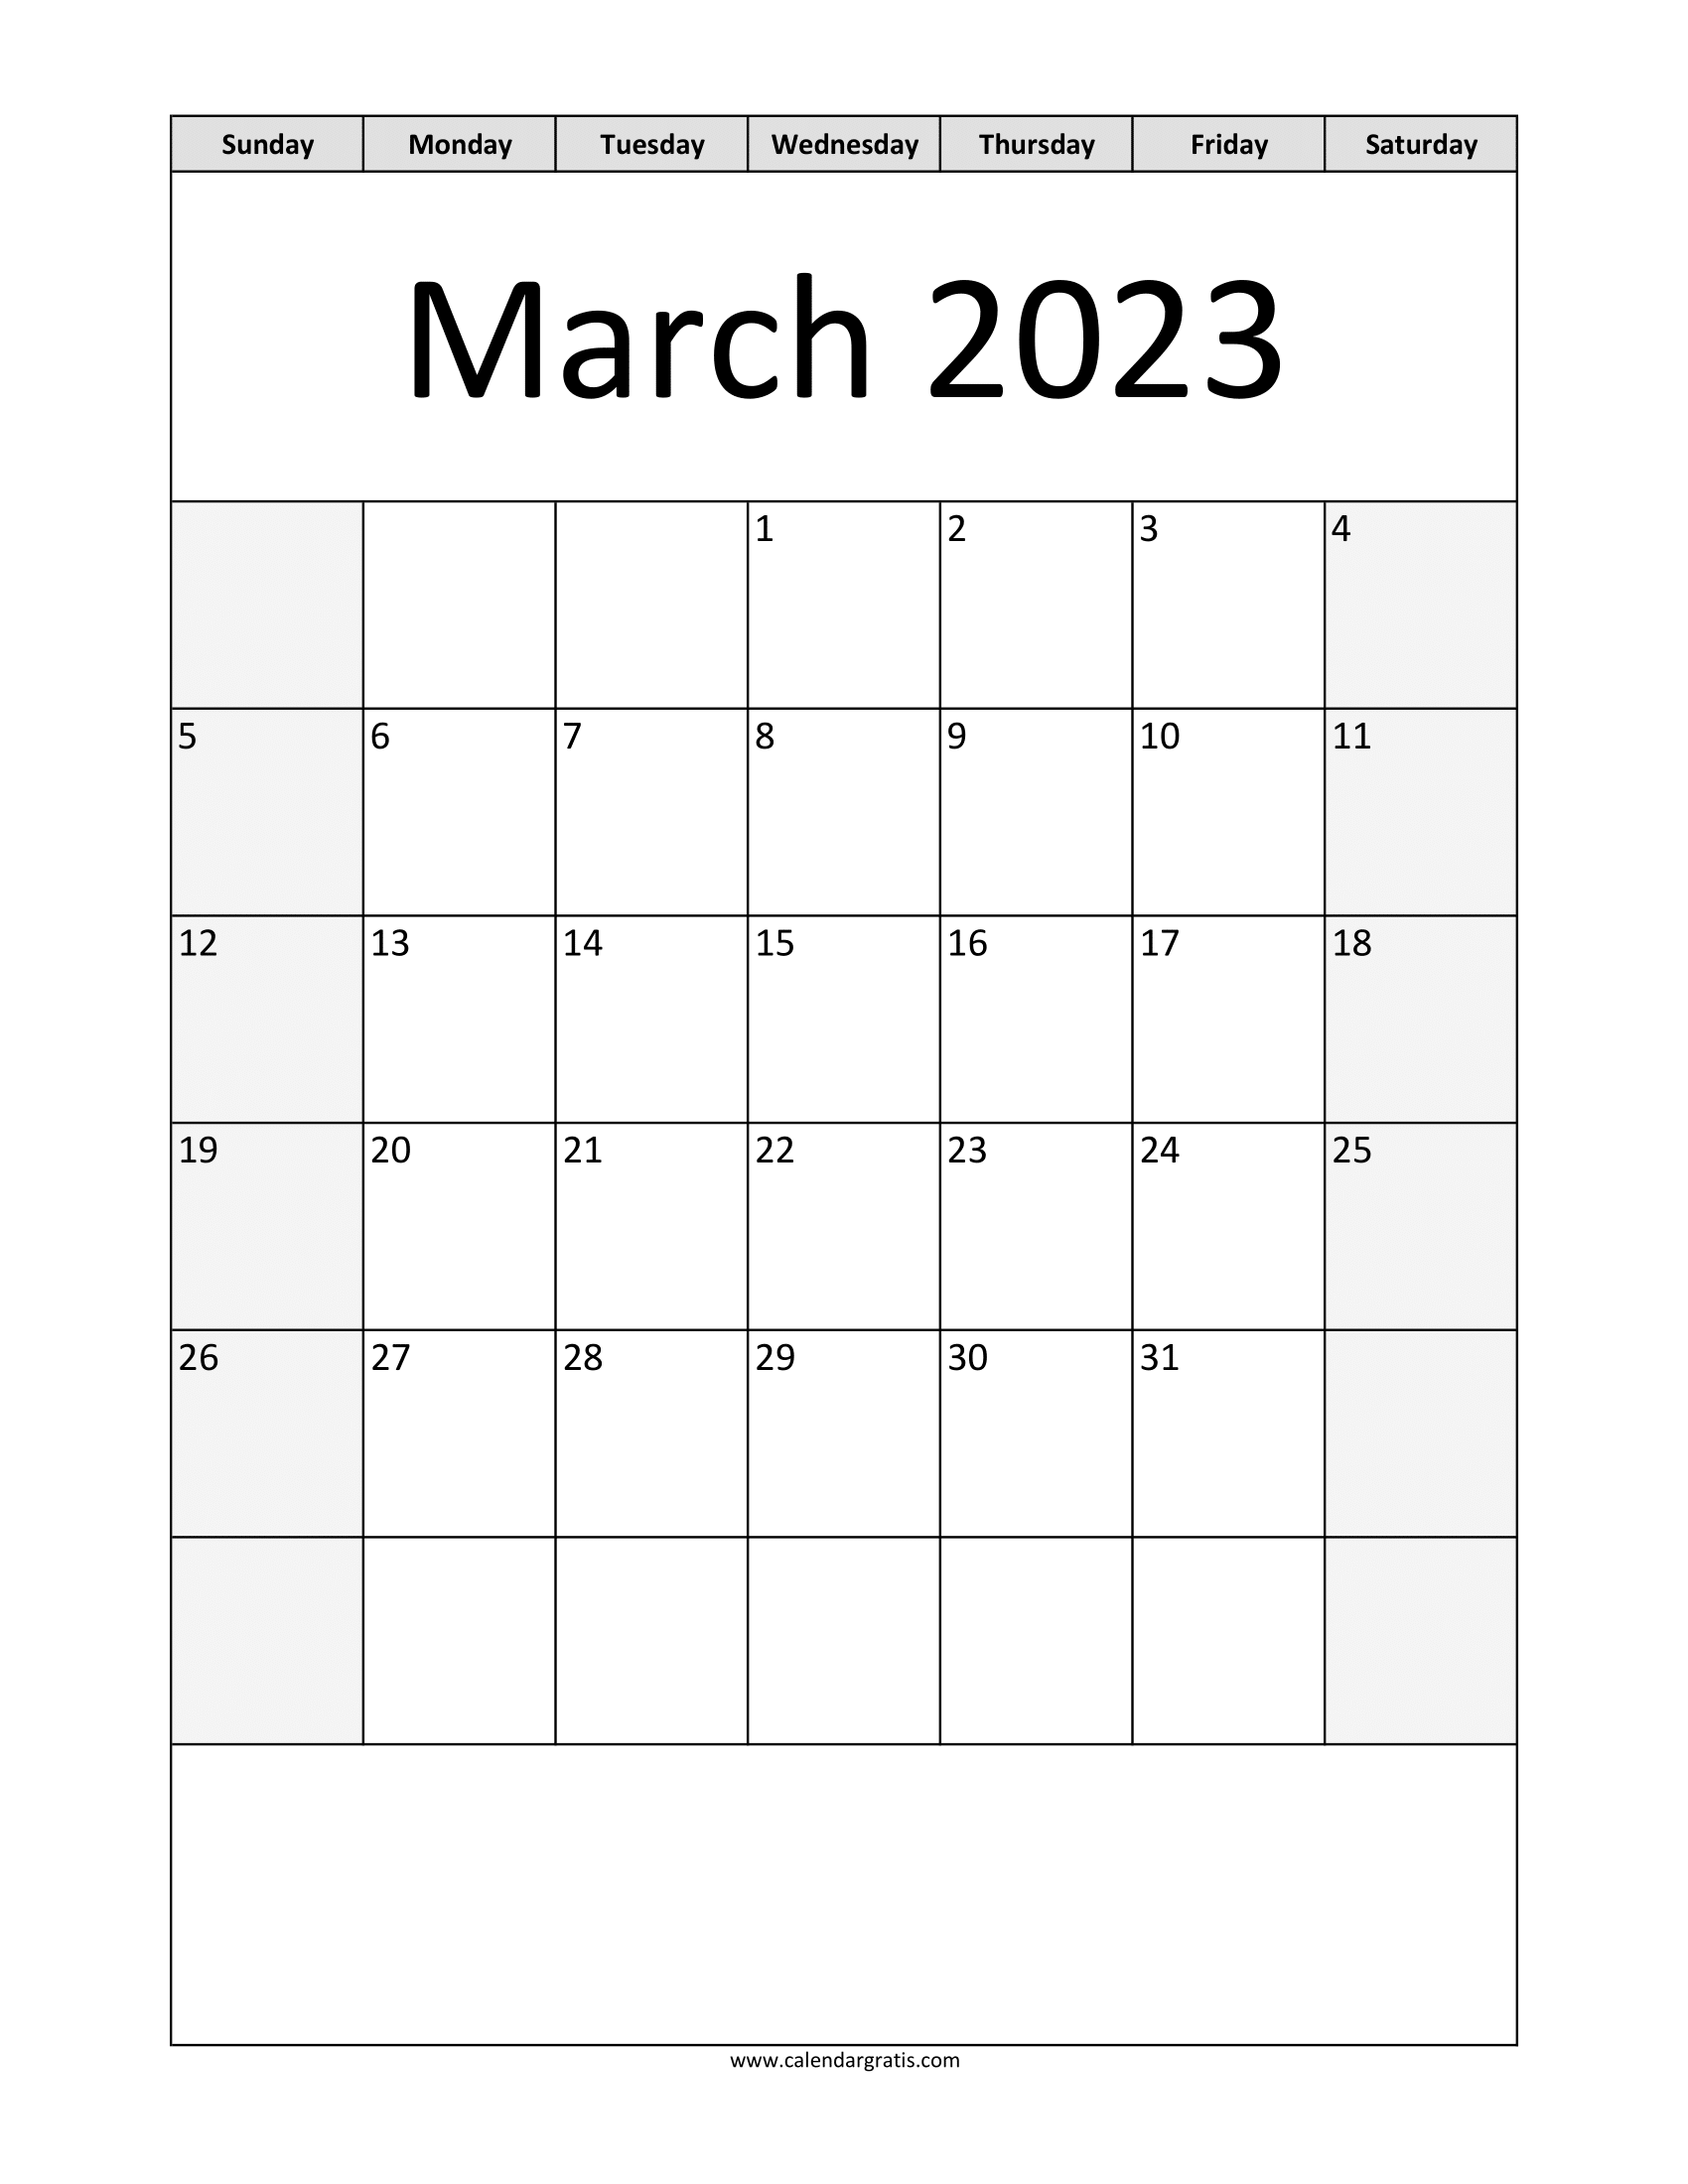 Print Free March 2023 A4 size vertical calendar template with the notes section. Mark special dates, and add festivals and events.